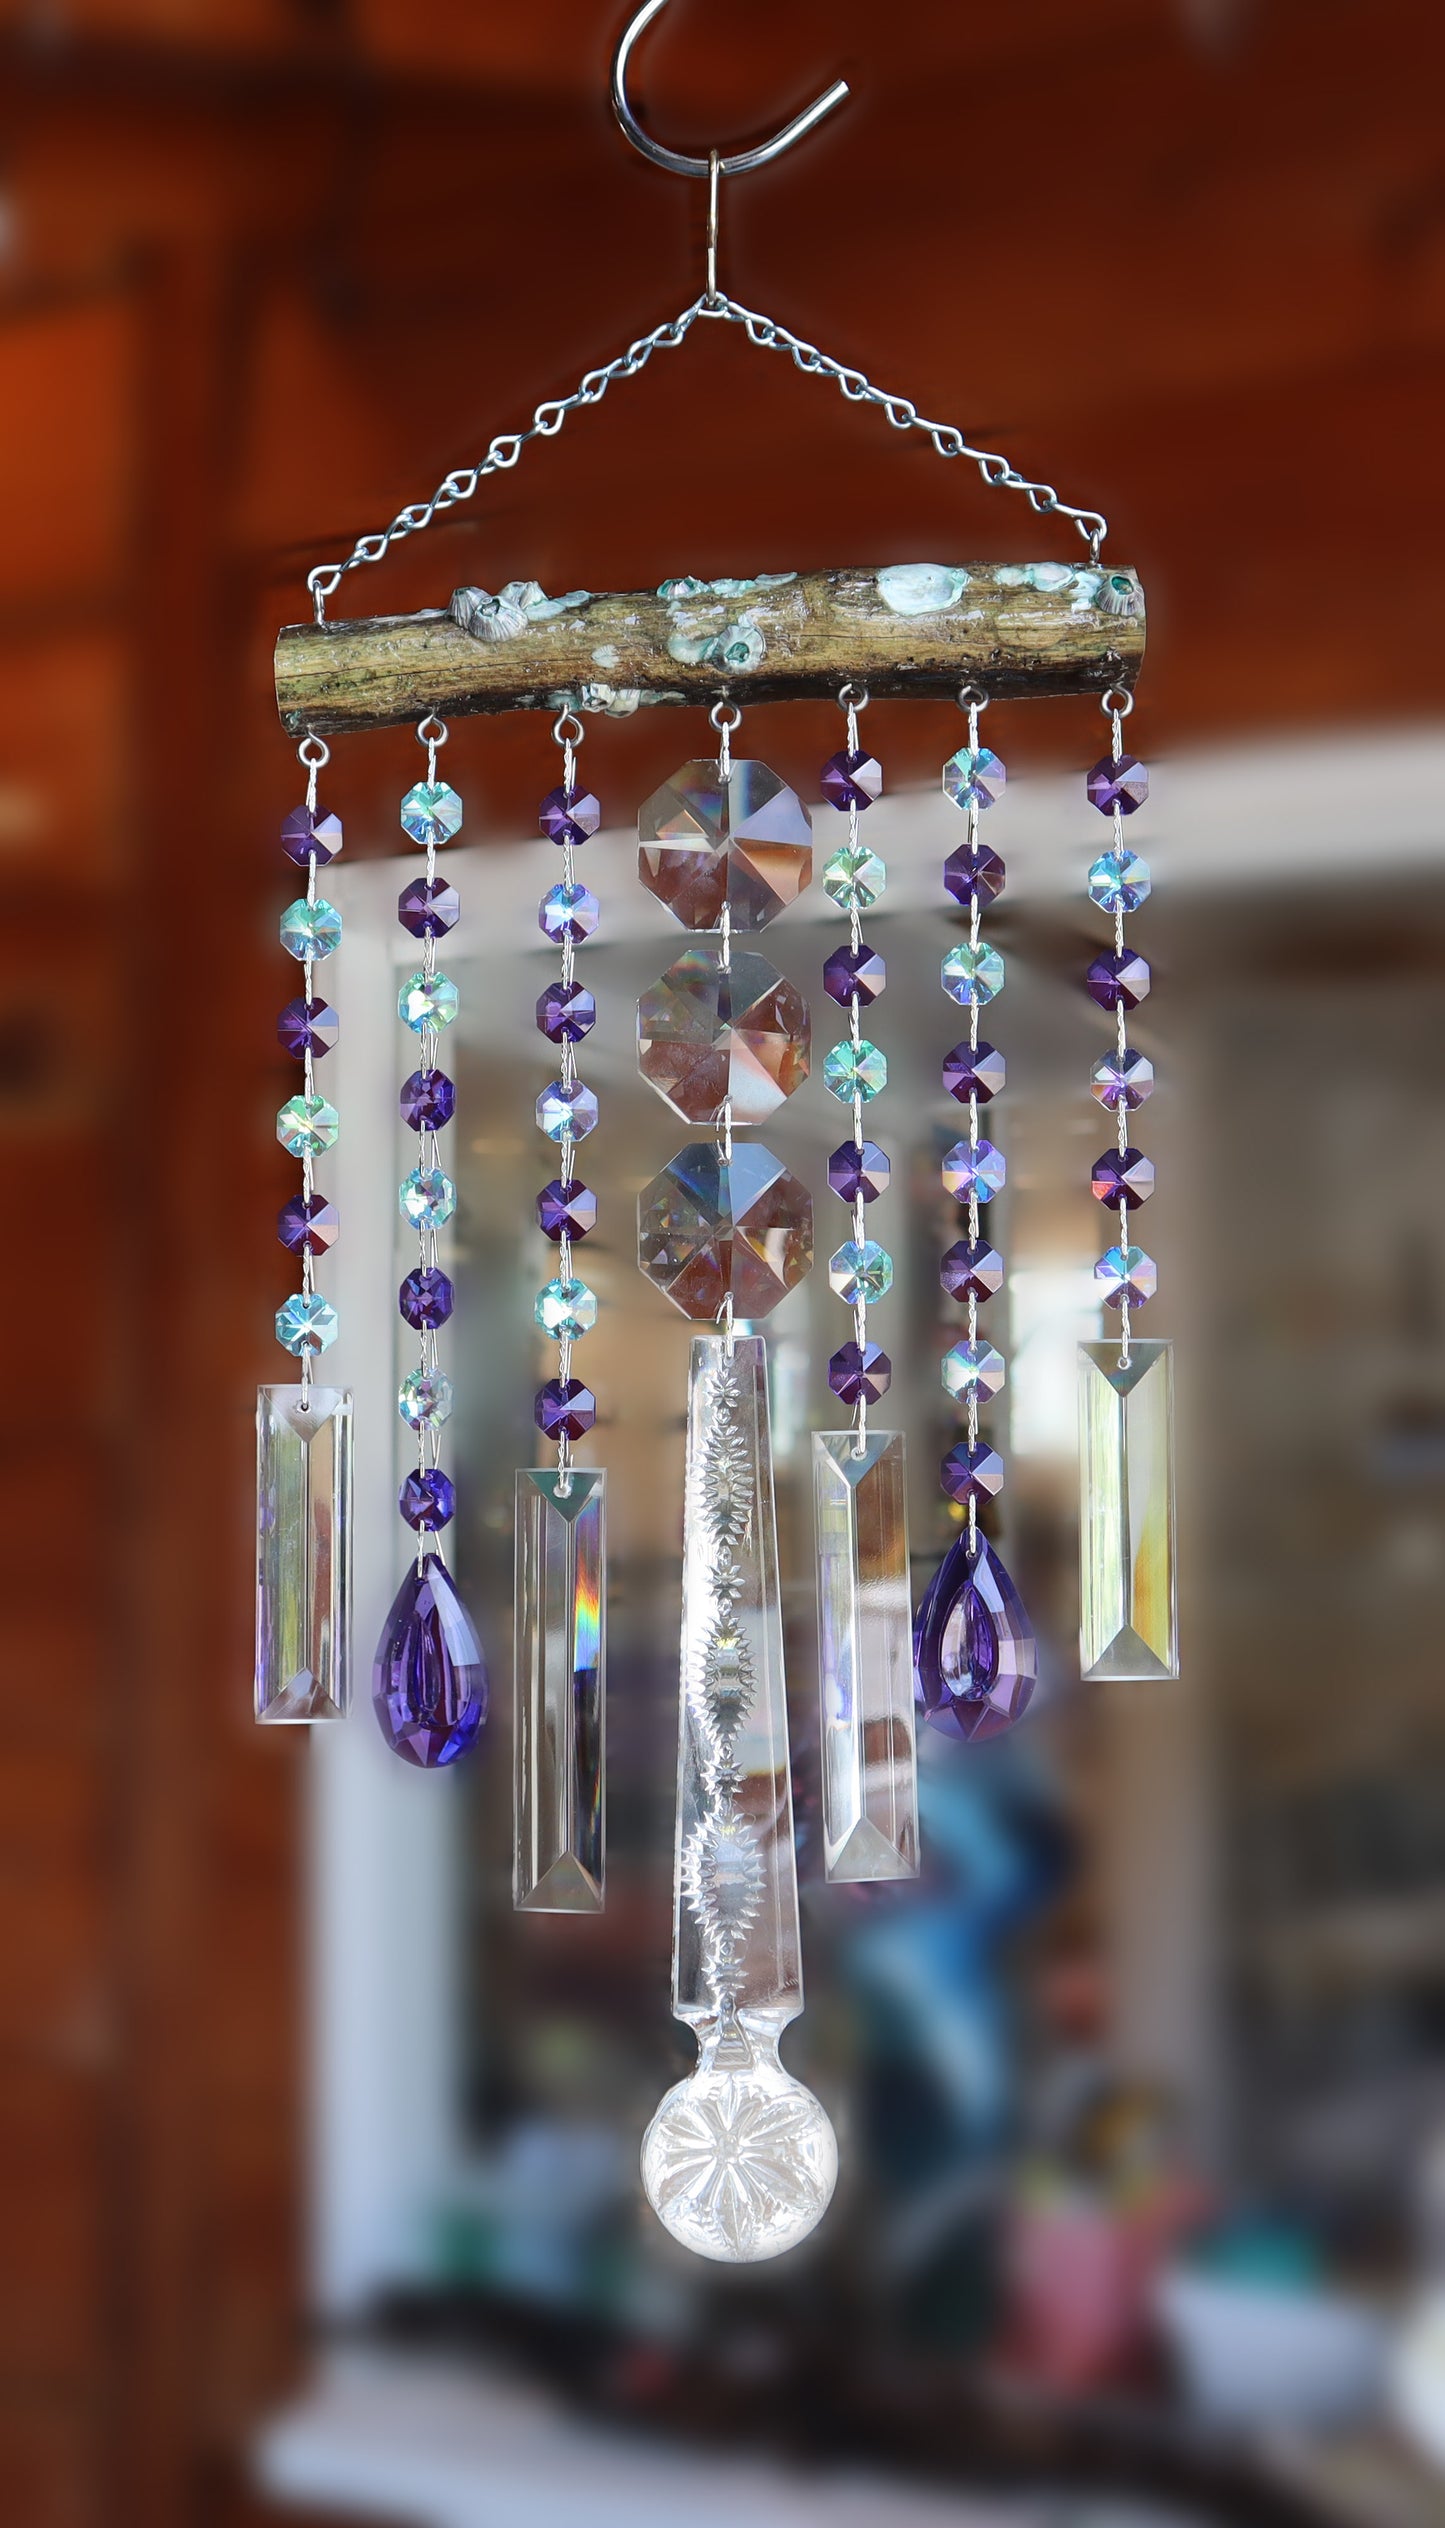 Barnacle windchime 7 chorus line with real chandiler crystals